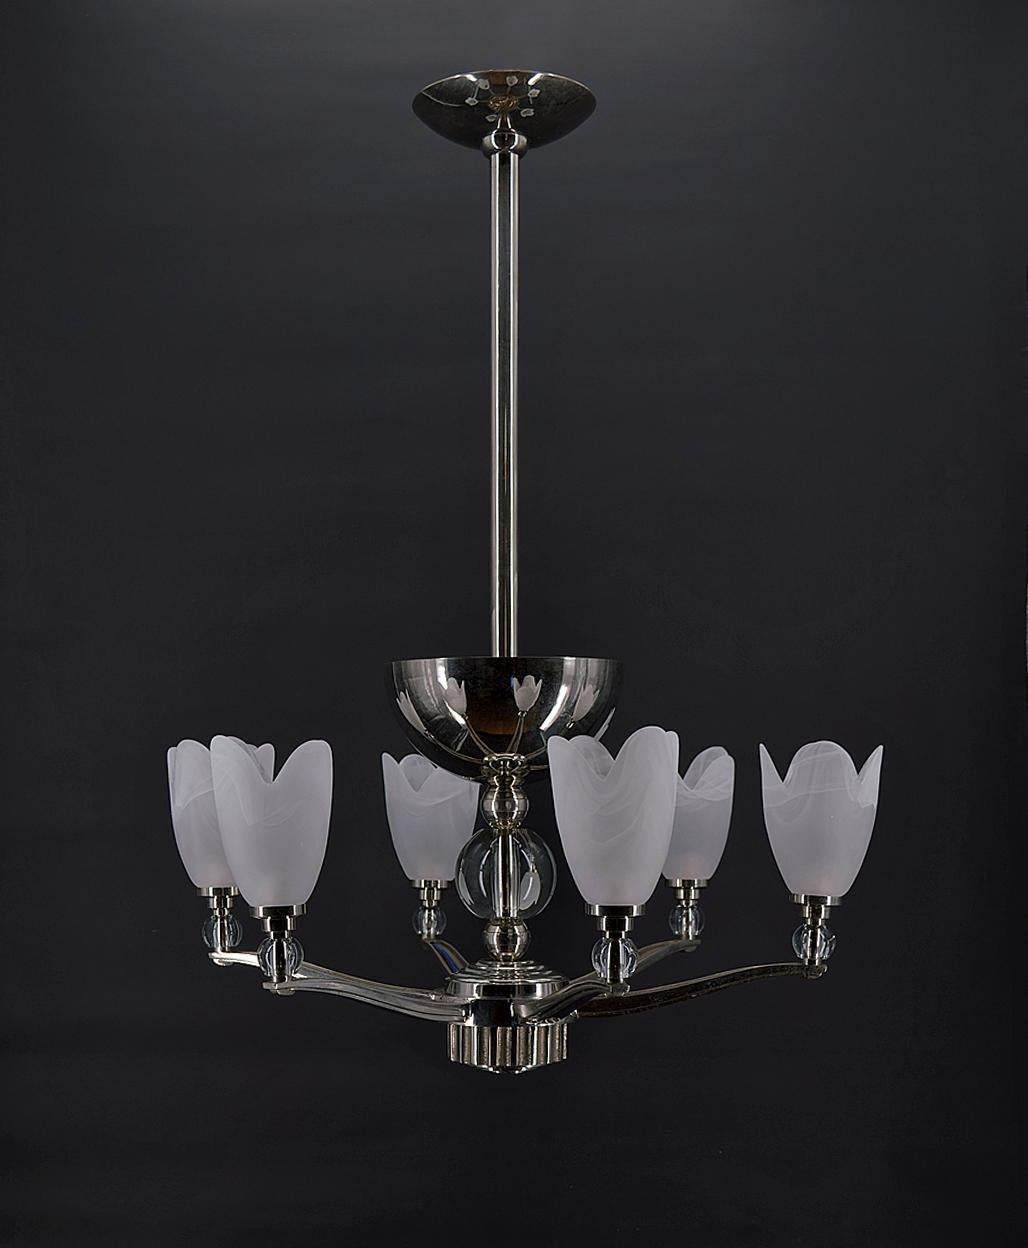 Elegant silver / chrome bronze chandelier composed of a ceiling diffuser with two lights, and 6 arms decorated with glass spheres, and six tulip lampshades in marbled effect white glass.

8 lights in total.

Modernist Art Deco, France, around